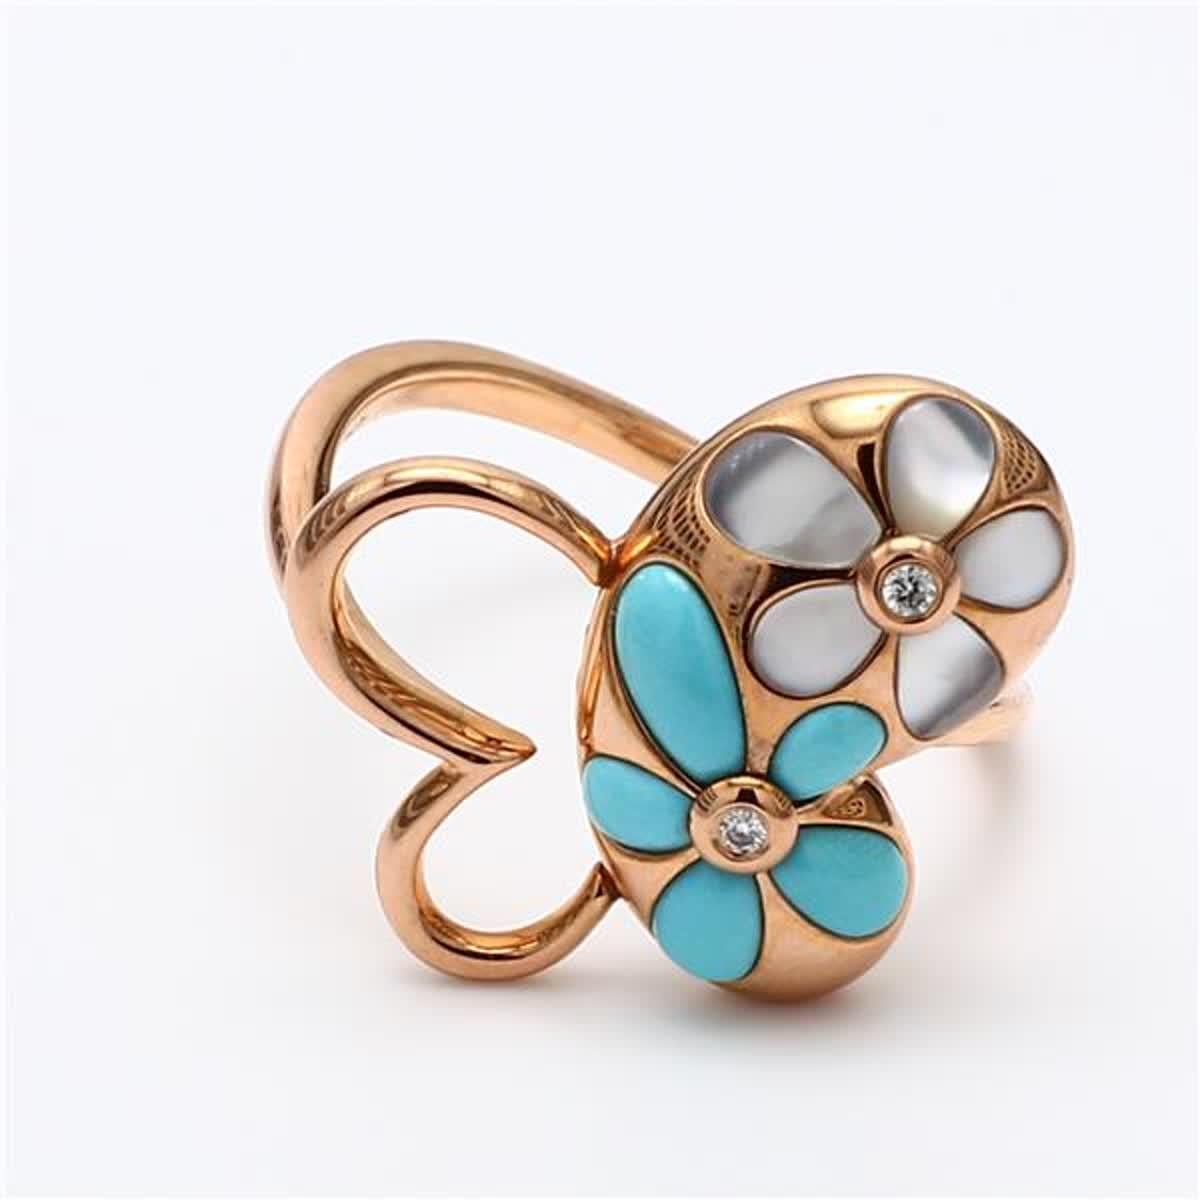 RareGemWorld's classic fashion ring. Mounted in a beautiful 18K Rose Gold setting with a natural turquoise, white pinctada maxima, and natural round white diamond melee. This ring is guaranteed to impress and enhance your personal collection!

Total